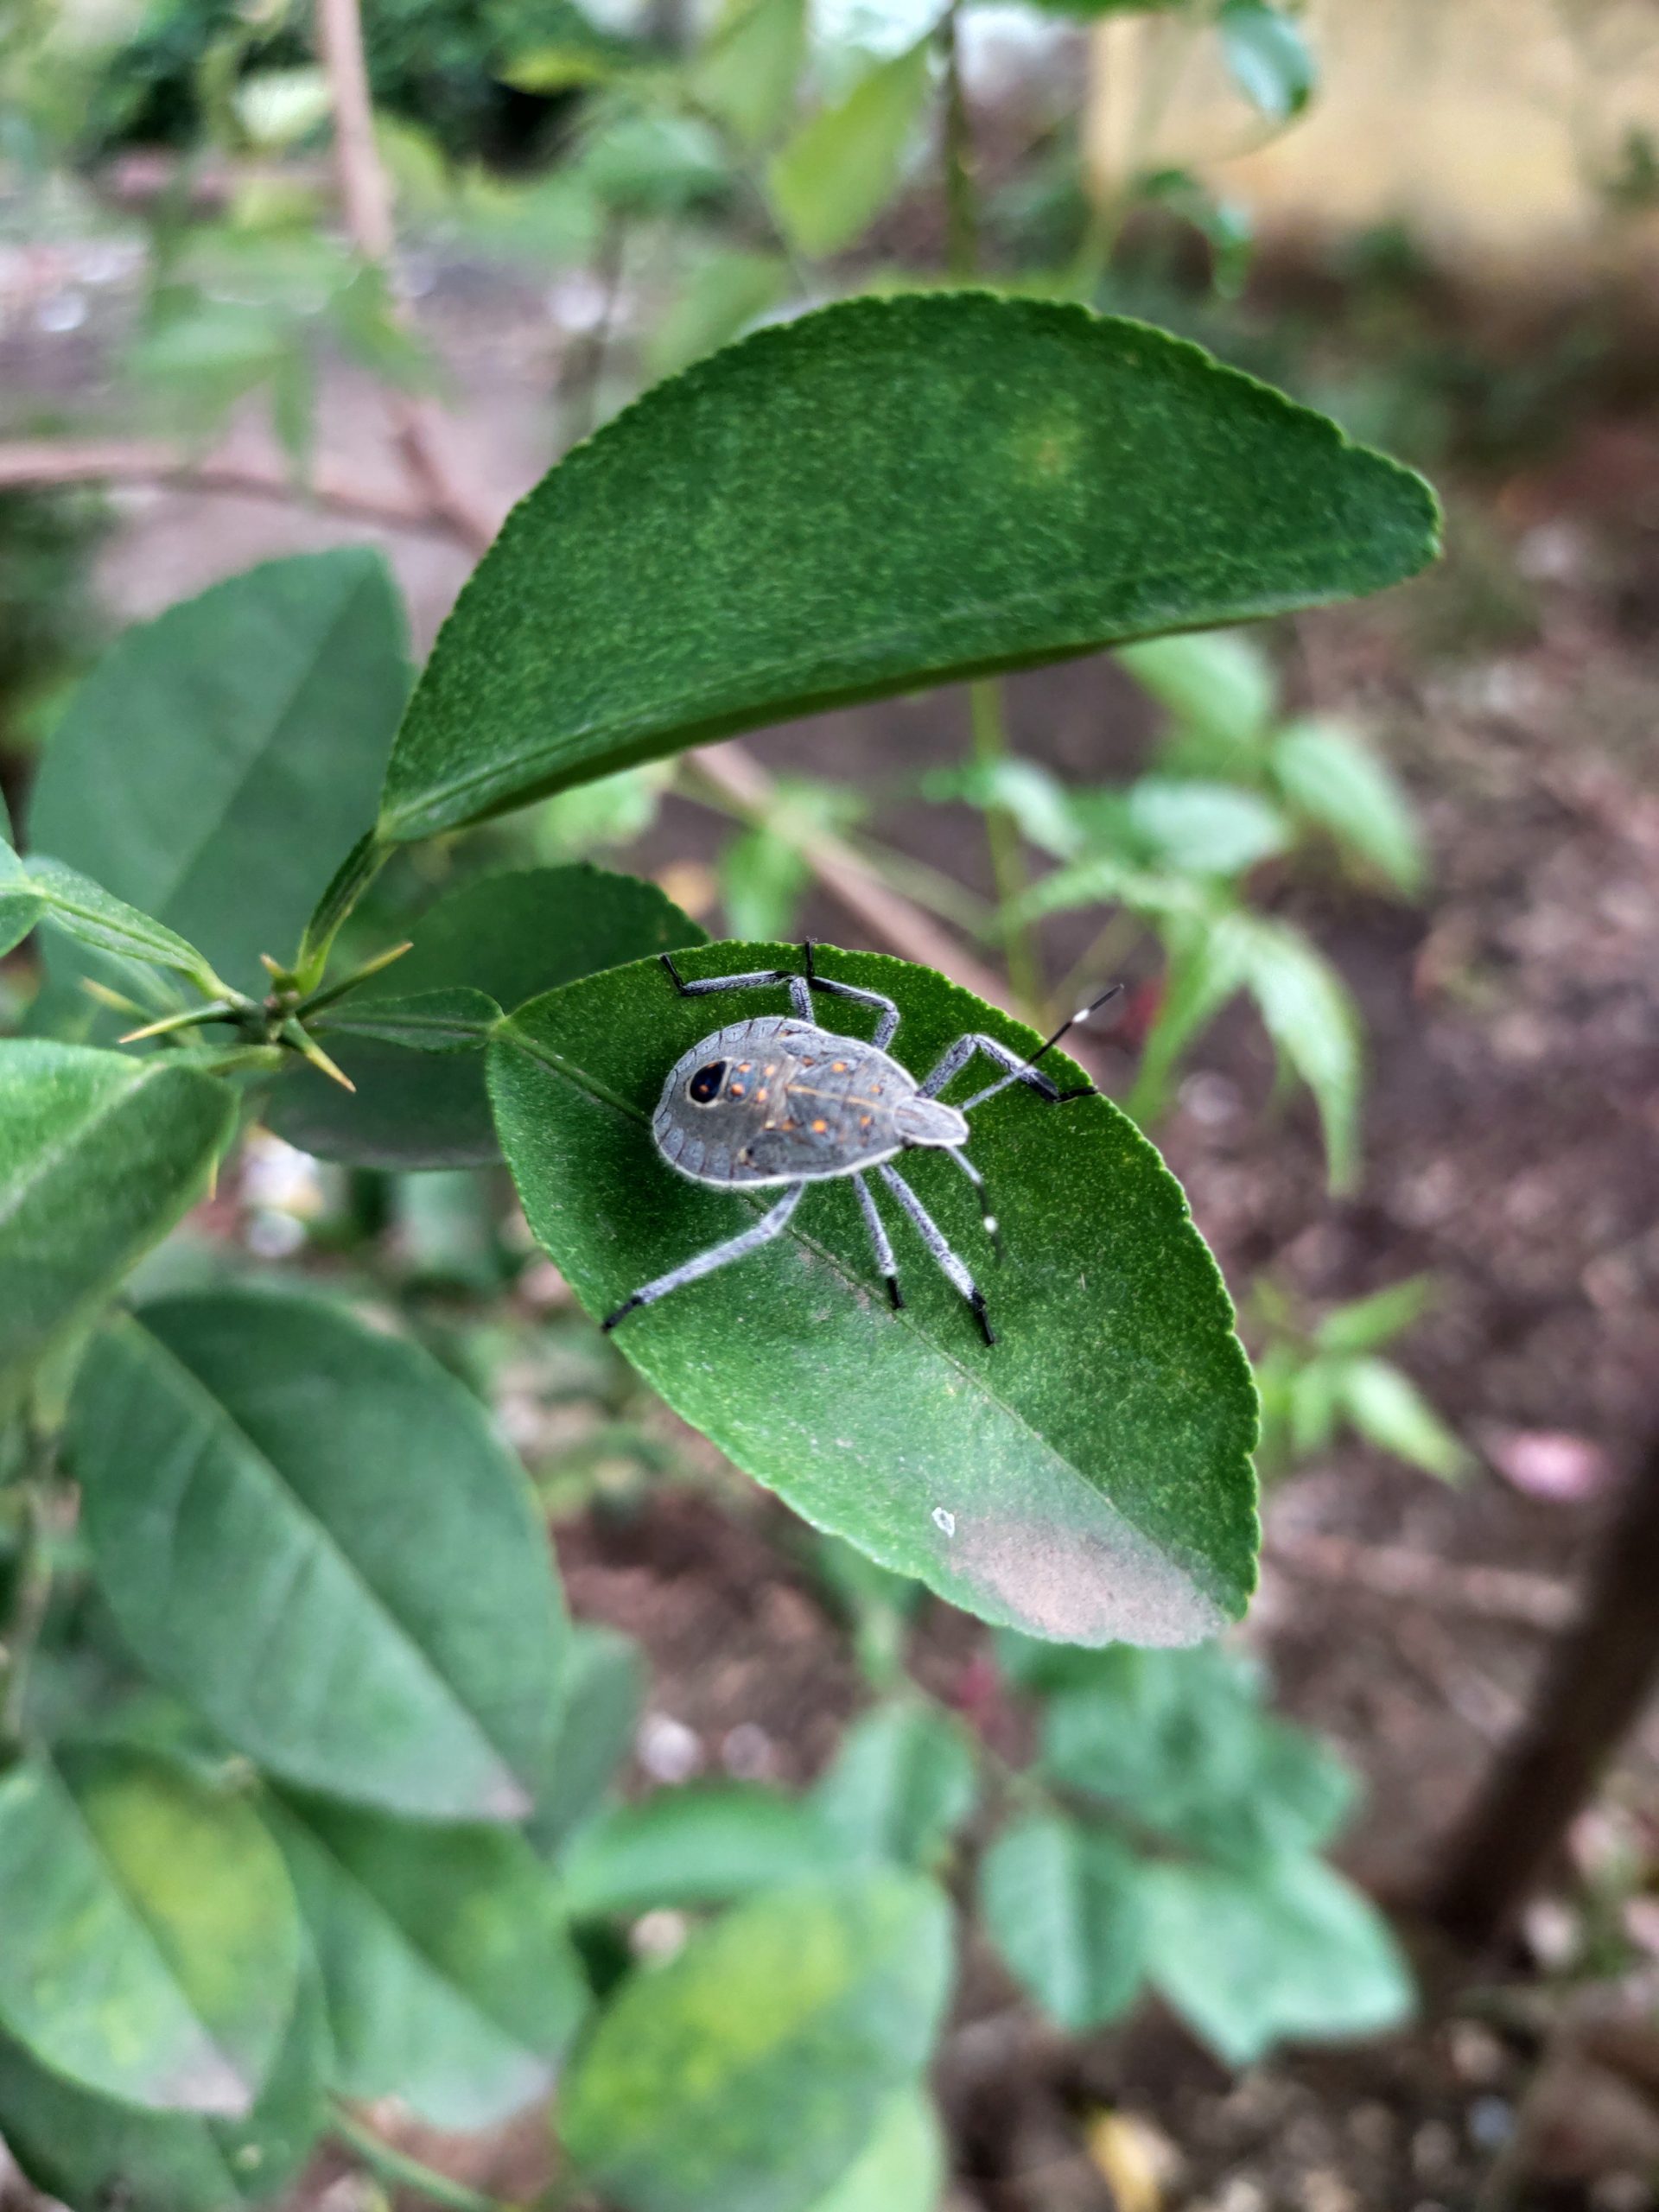 Insect on leaf